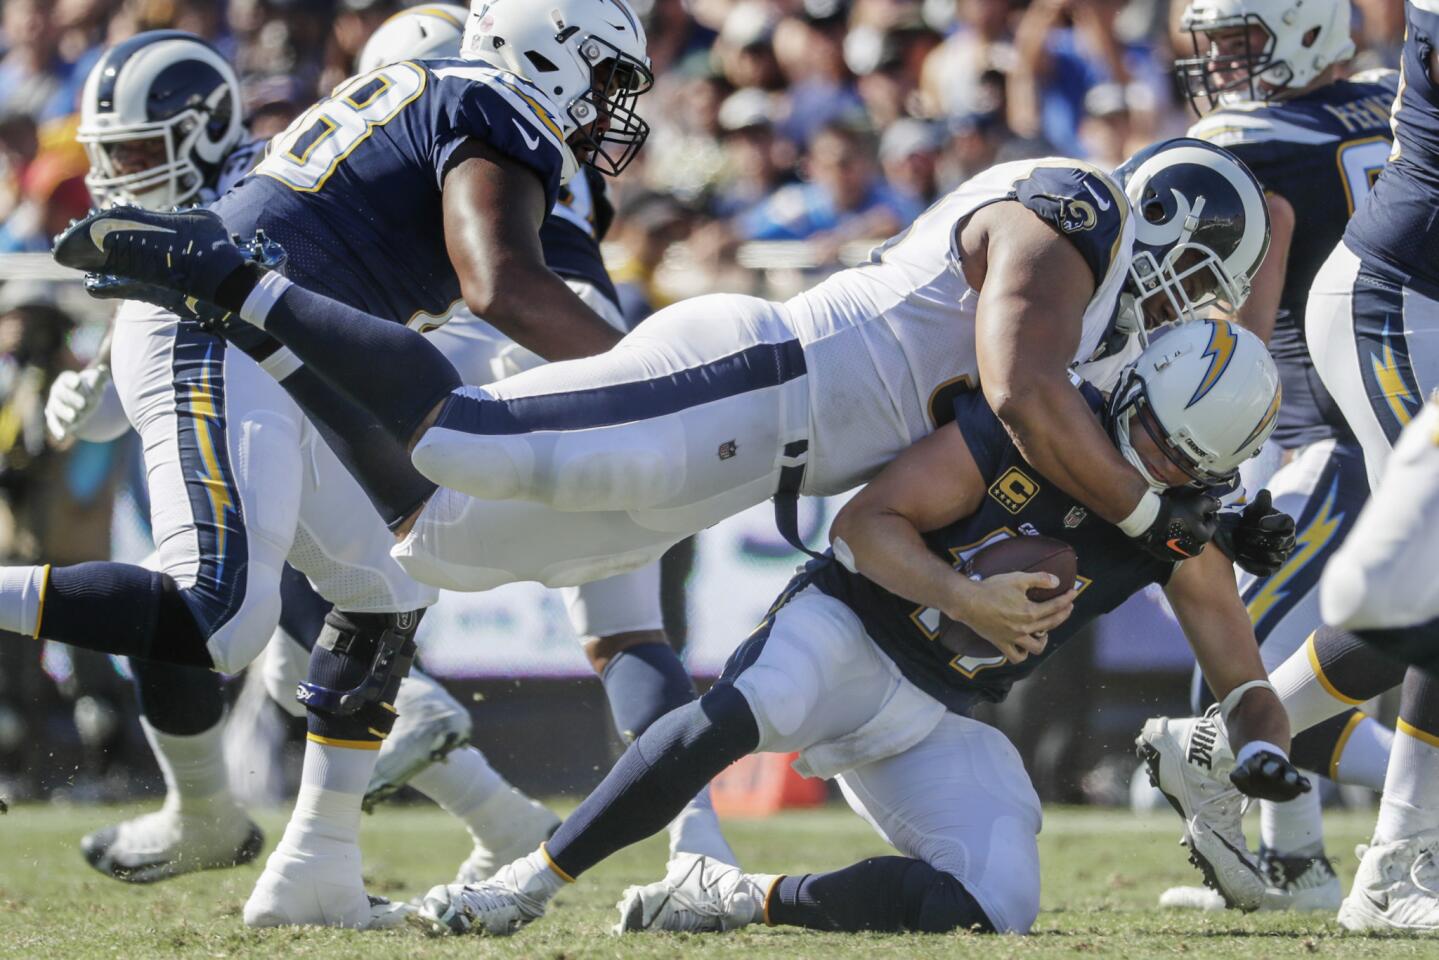 Chargers quarterback Philip Rivers is sacked by Rams defensive lineman Ndamukong Suh during a third quarter drive on Sept. 23